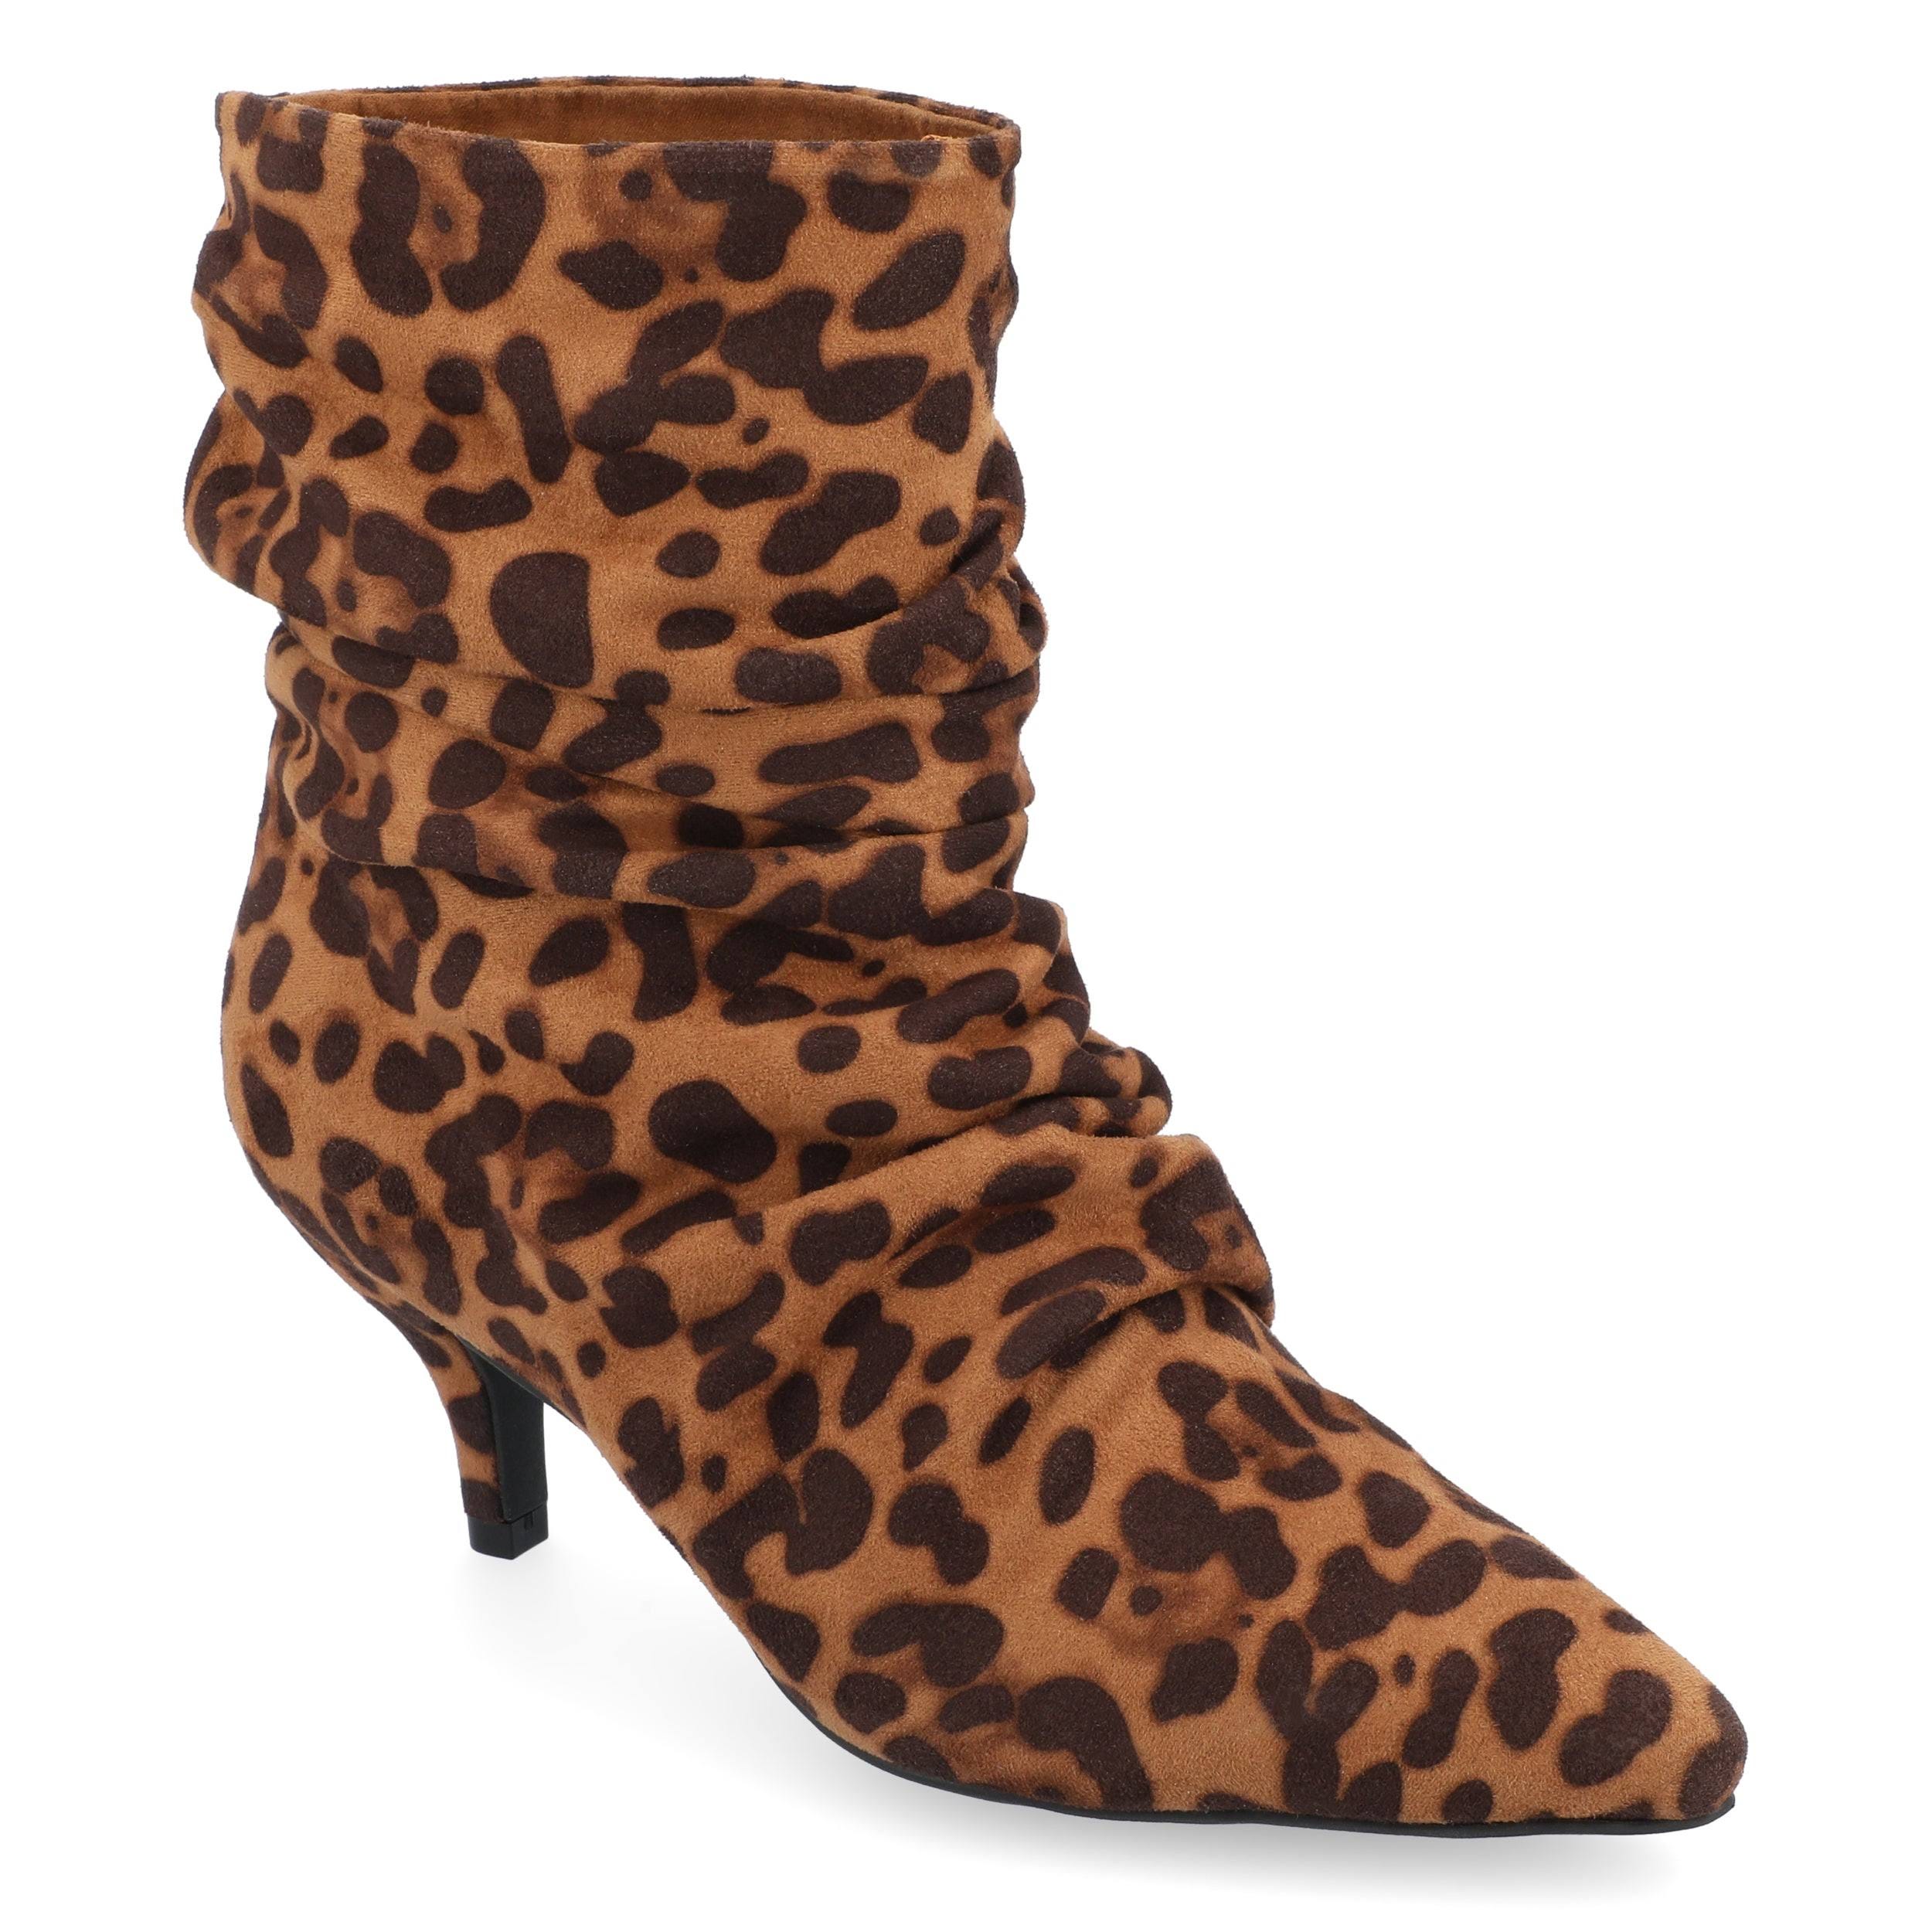 Vegan Leopard Ankle Boots with Comfort Foam Footbed | Image